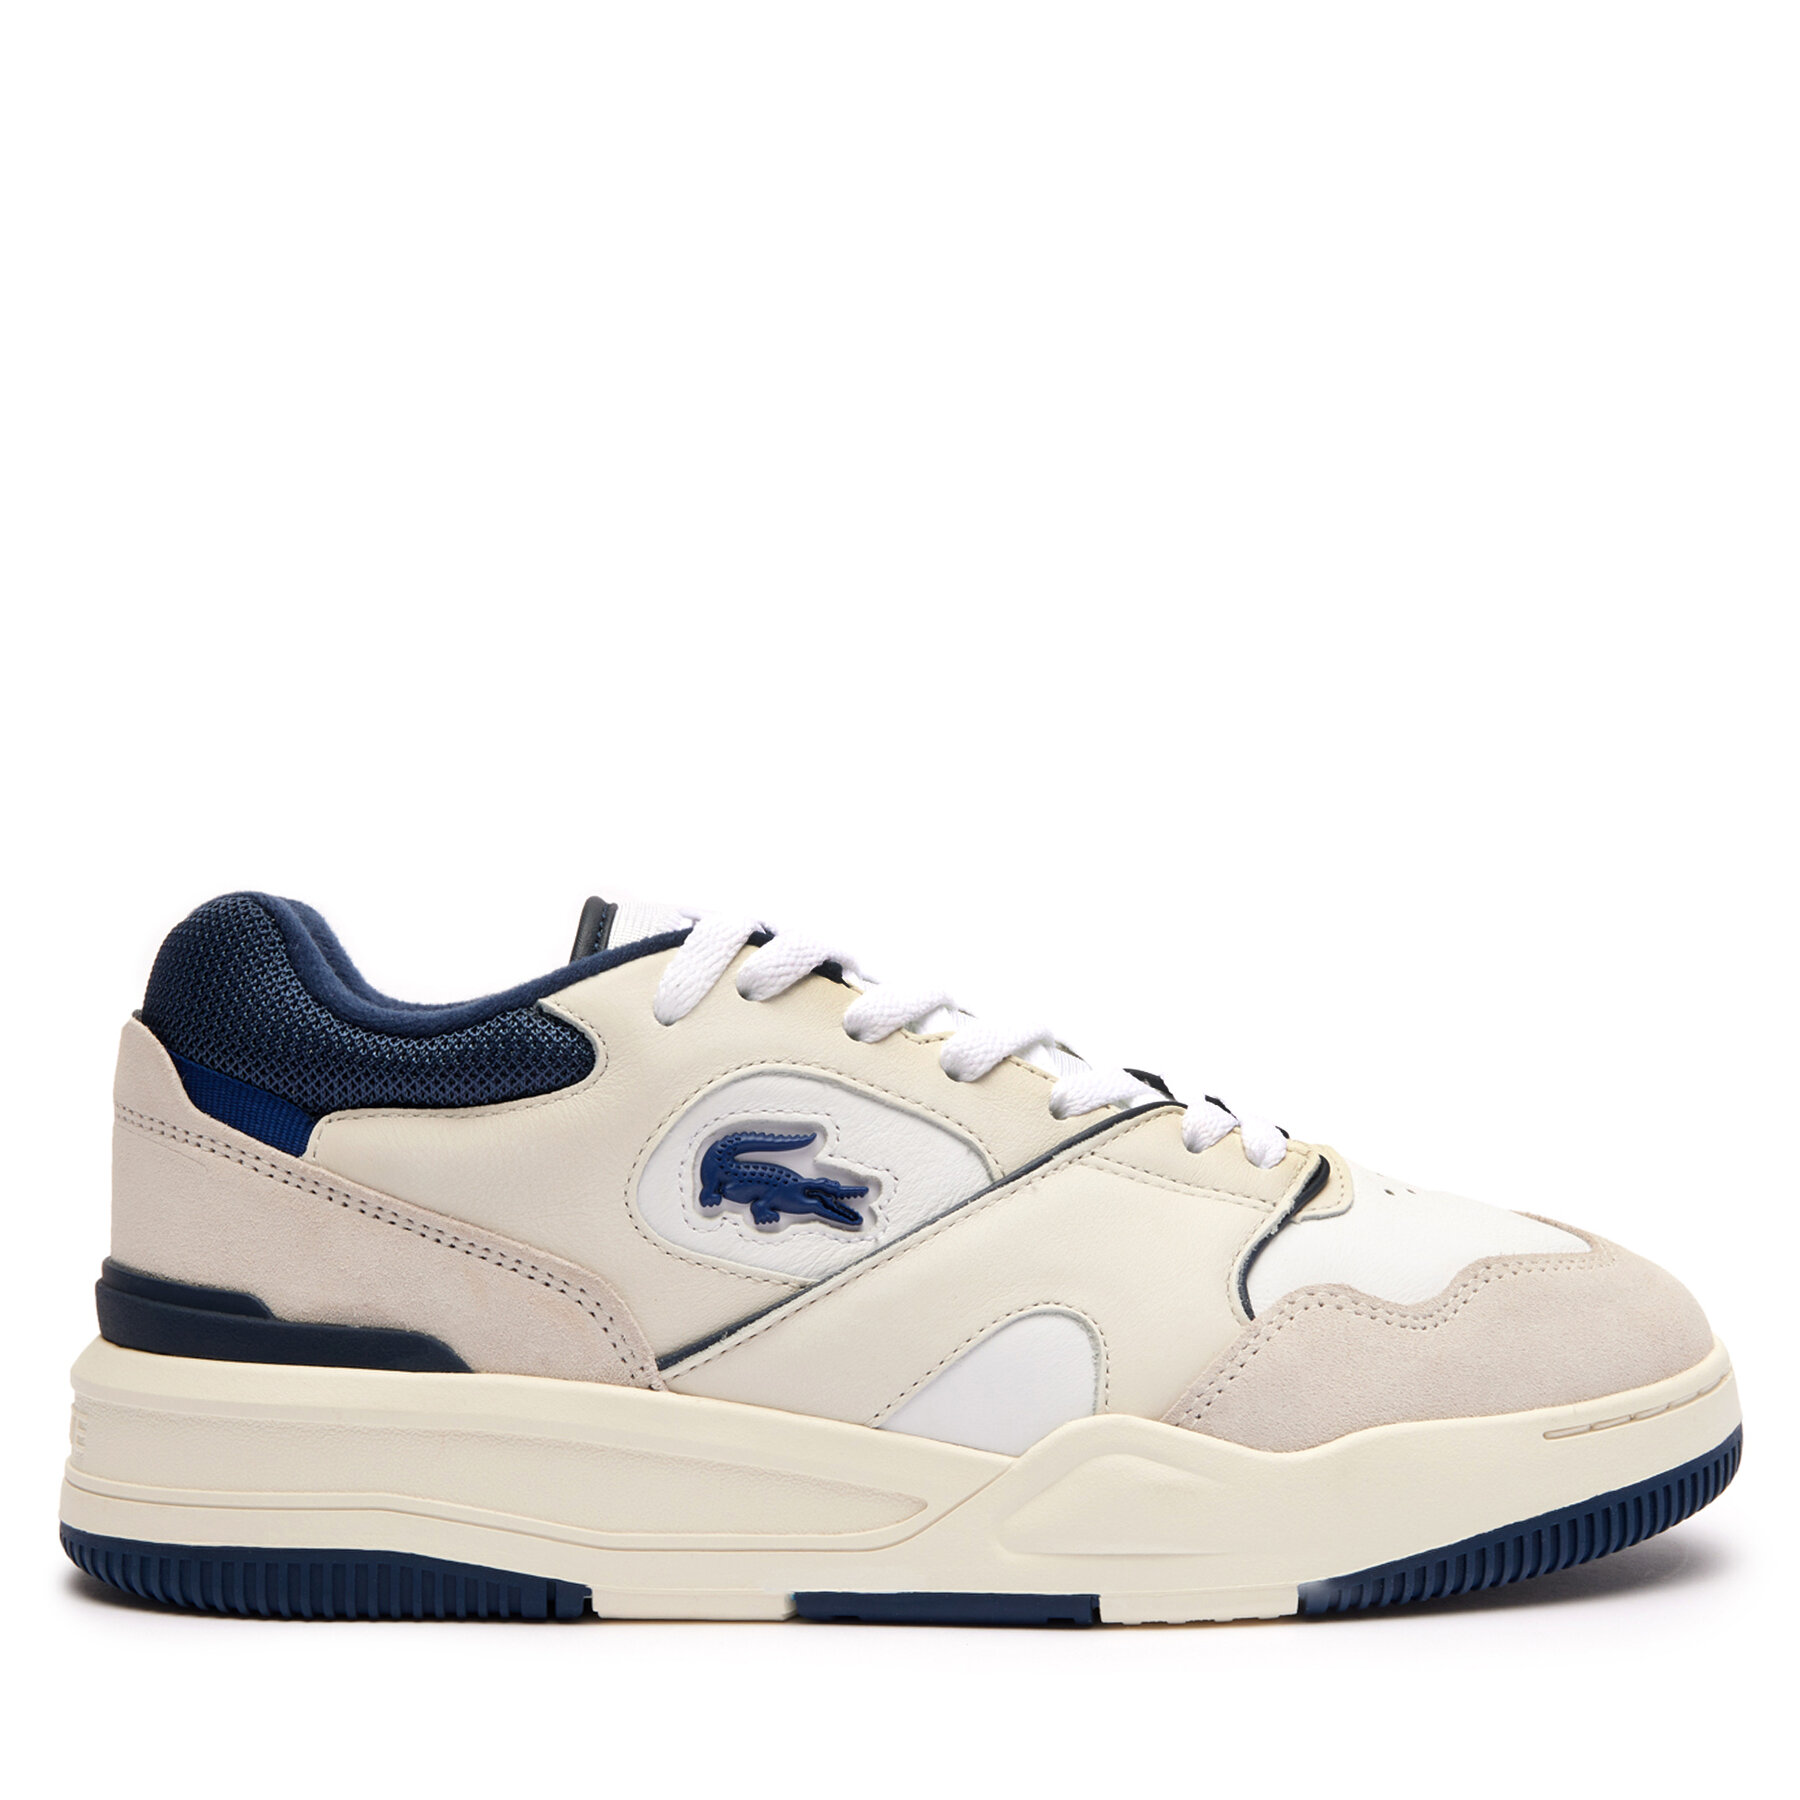 Sneakers Lacoste Lineshot Leather Logo 747SMA0062 Wht/Nvy 042 von Lacoste